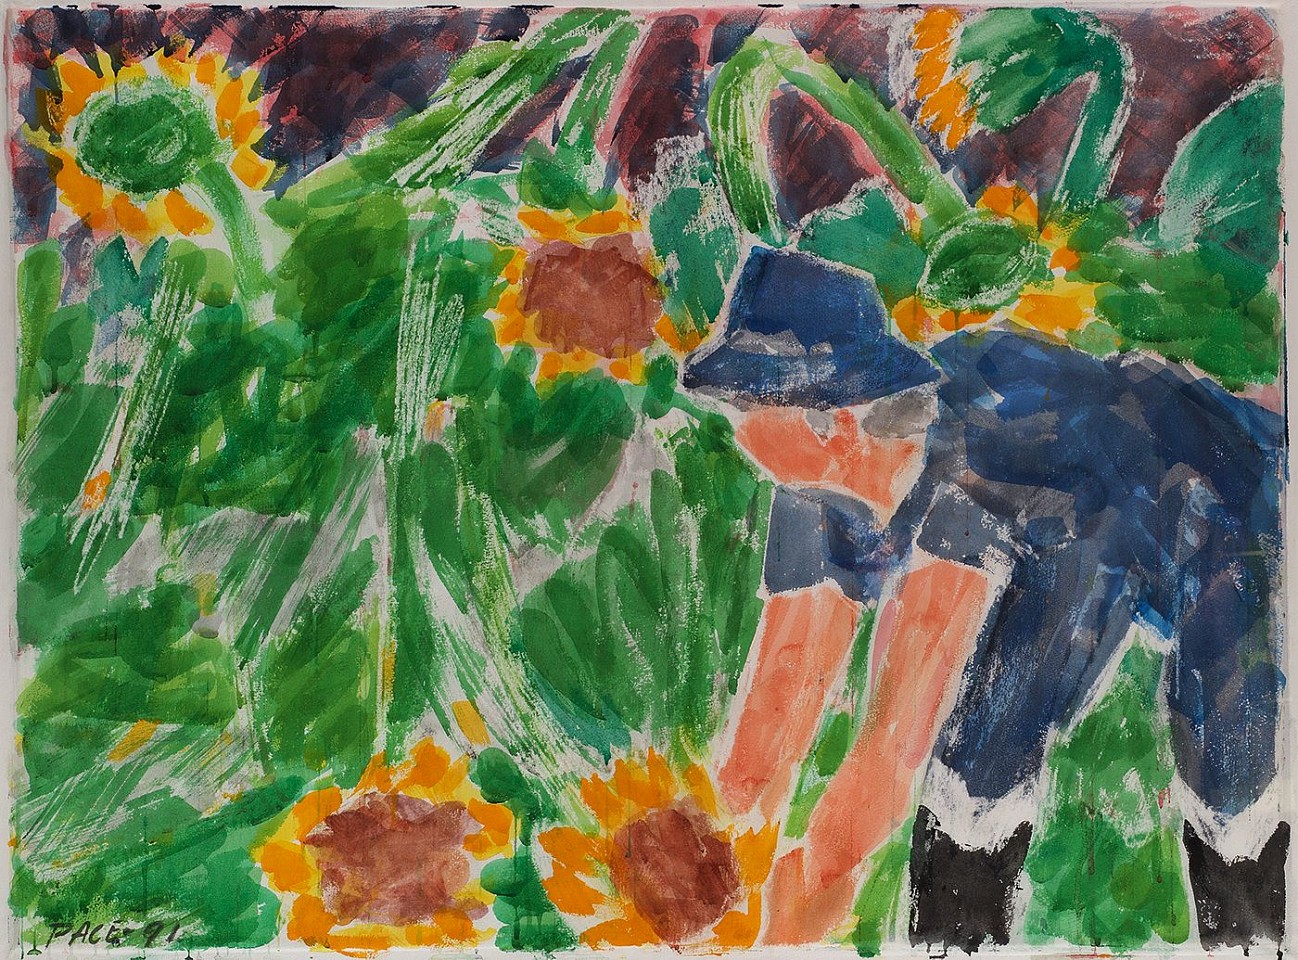 Stephen Pace, Sunflowers, After the Storm #2 (91-DSW2), 1991
Watercolor on paper, 31 x 42 in. (78.7 x 106.7 cm)
PAC-00079